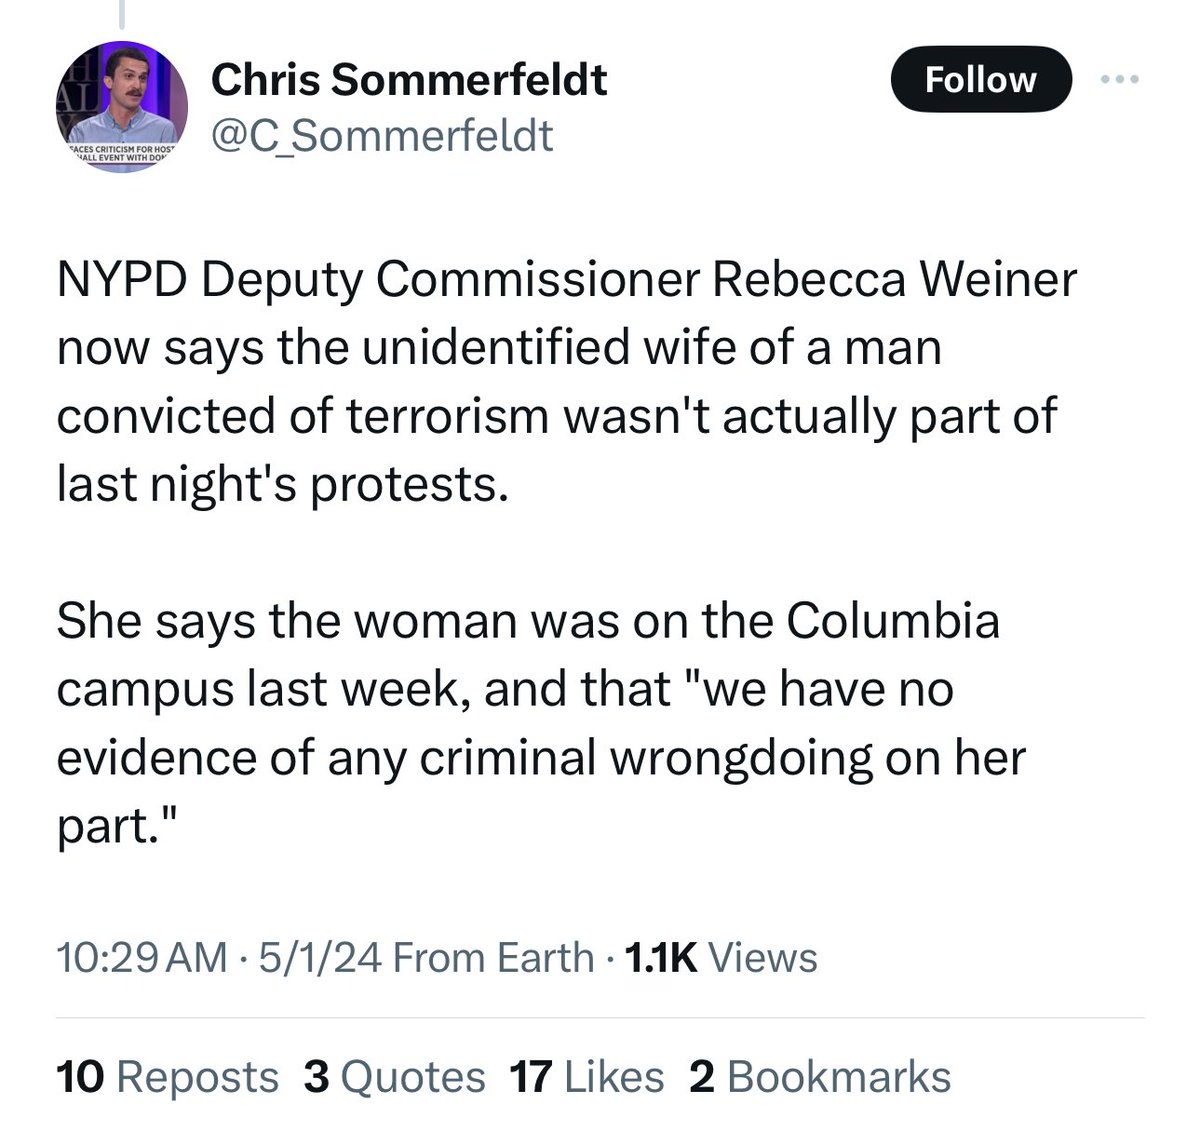 the Adams administration lied and the media ran with it the NYPD now admits there was no “wife of a terrorist” at the Columbia protests after the Mayor used this as cover to assault student protesters last night